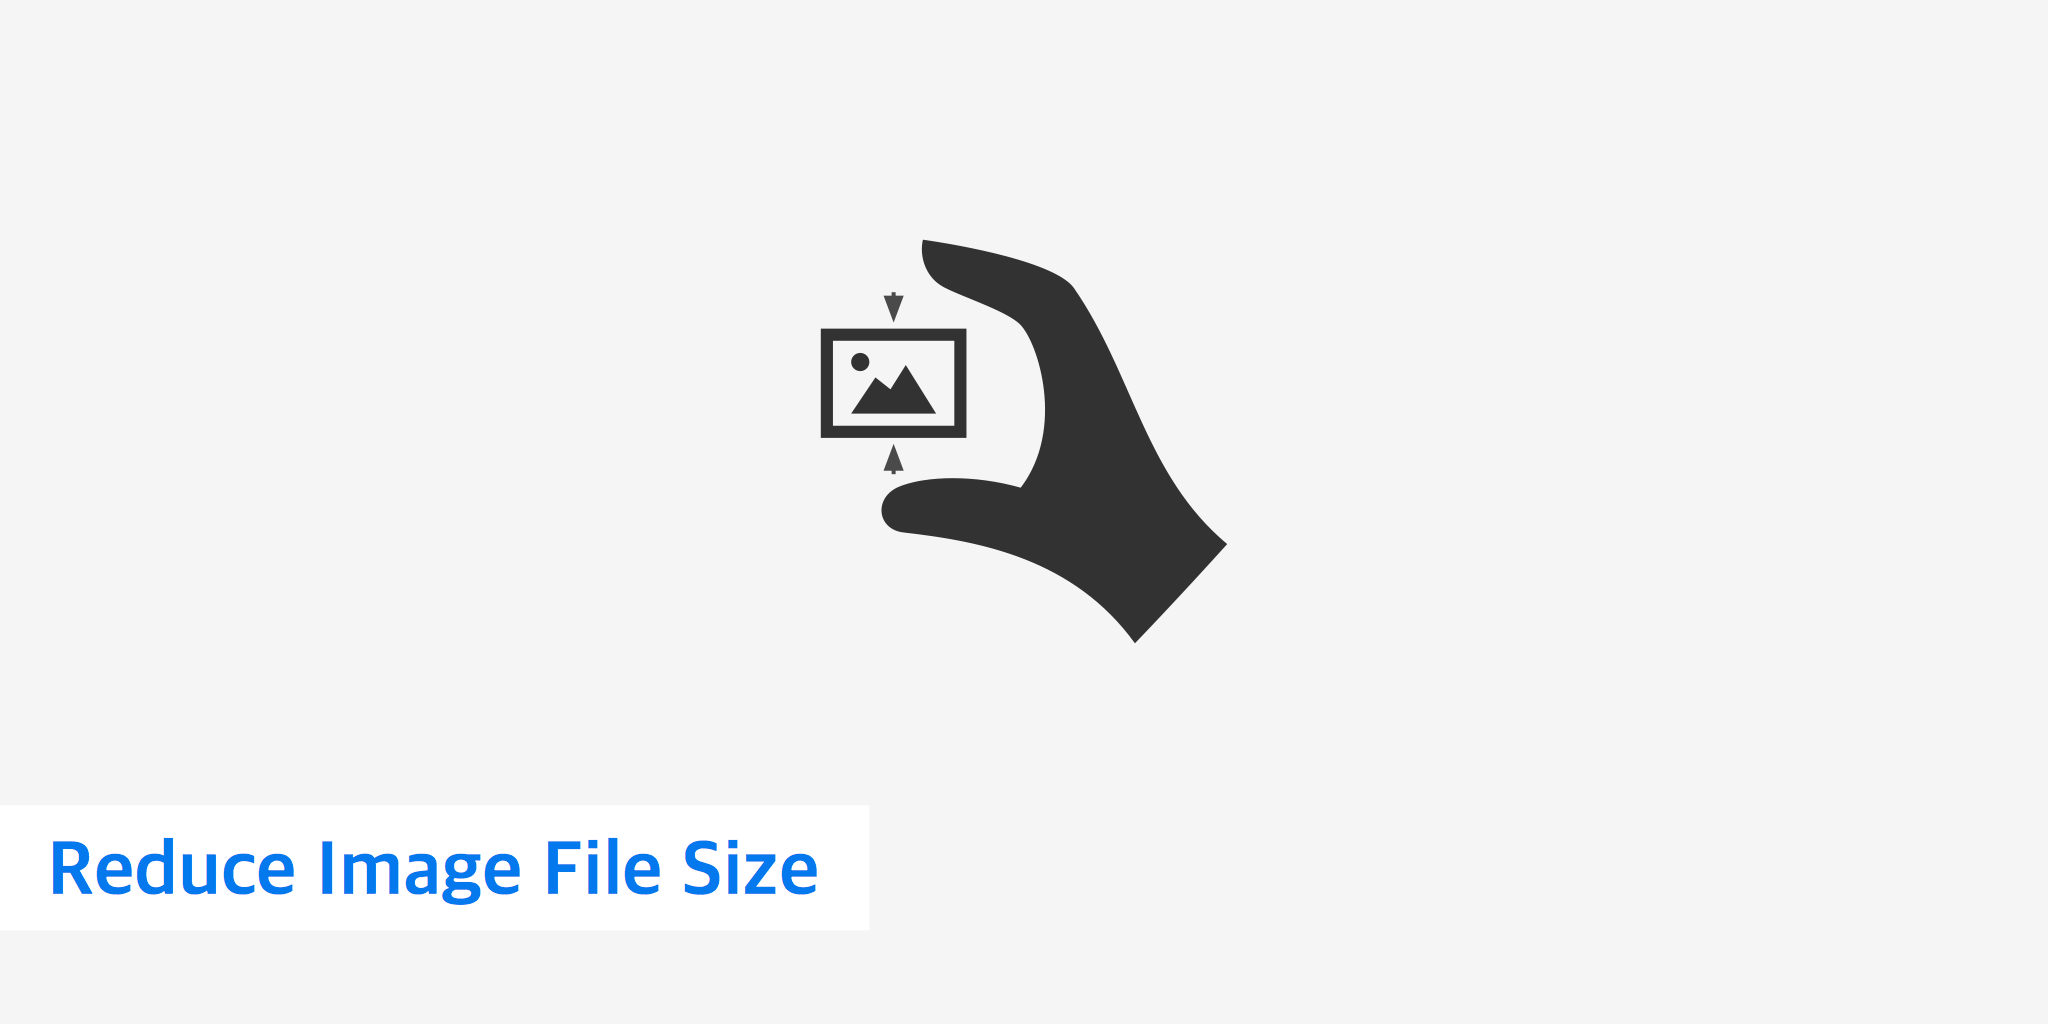 Reduce Logo - Reduce Image File Size - KeyCDN Support